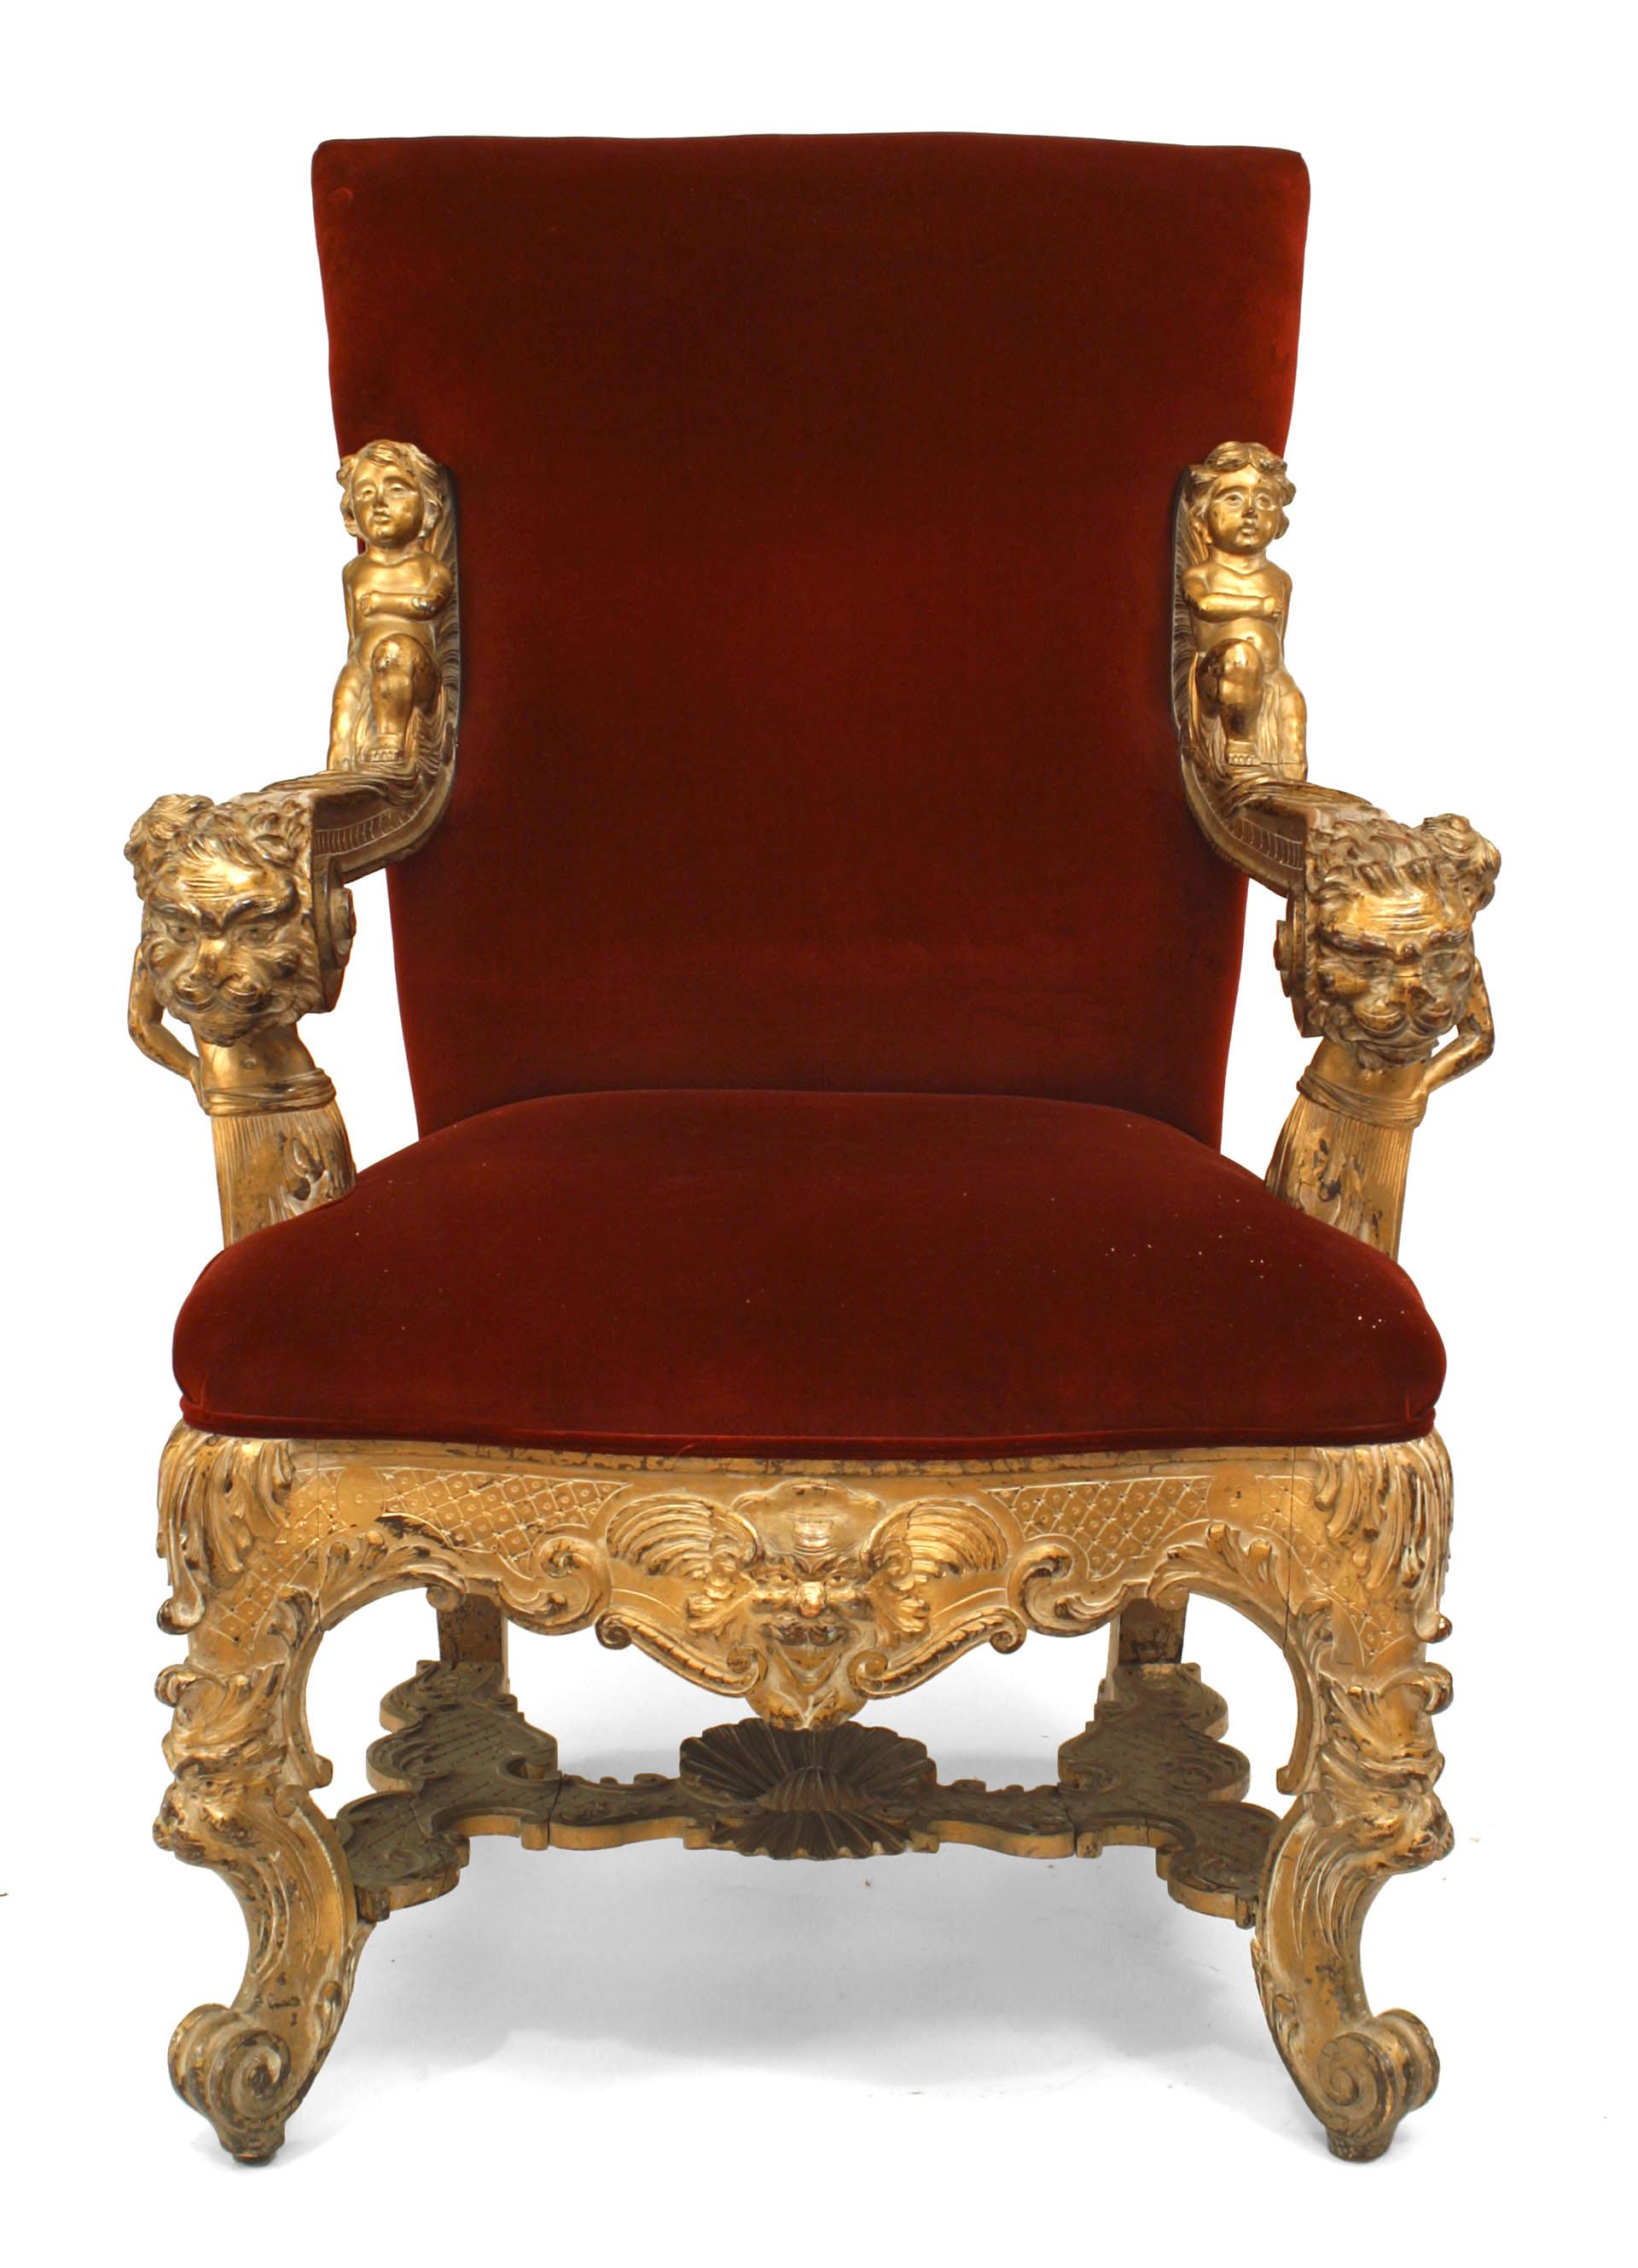 Late 19th, Early 20th Century Italian Rococo style gilt carved throne chair with stretcher and cupids on arms with lion head and red velvet upholstery.